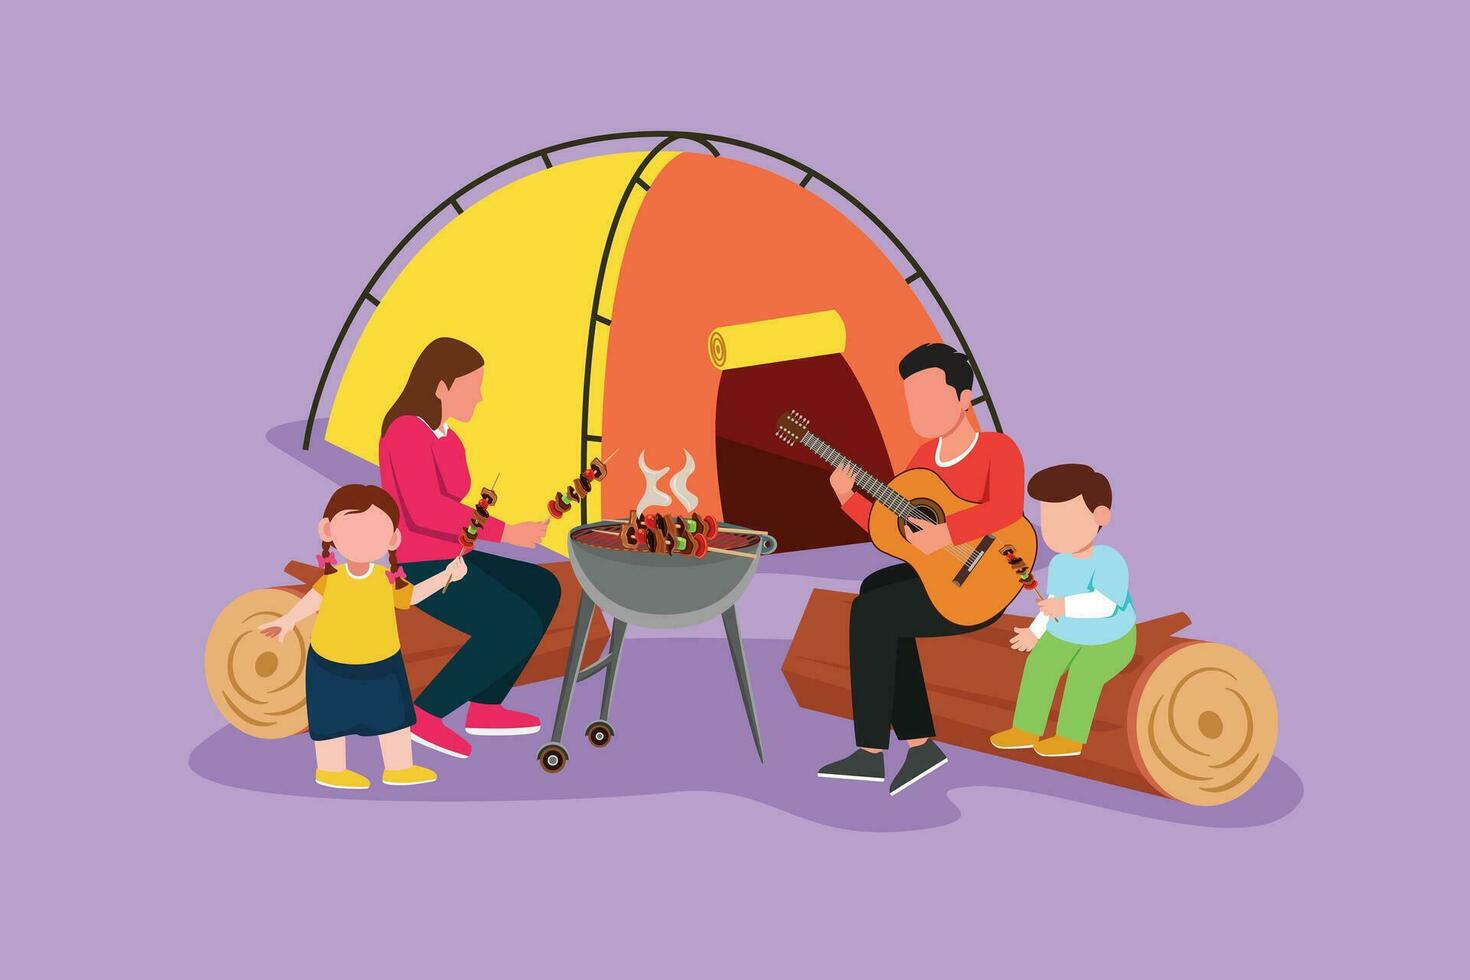 Cartoon flat style drawing of happy hiker family sit by campfire. Tourists, campers. Dad playing guitar, mom and kids fry meat barbecue. Night camping entertainment. Graphic design vector illustration